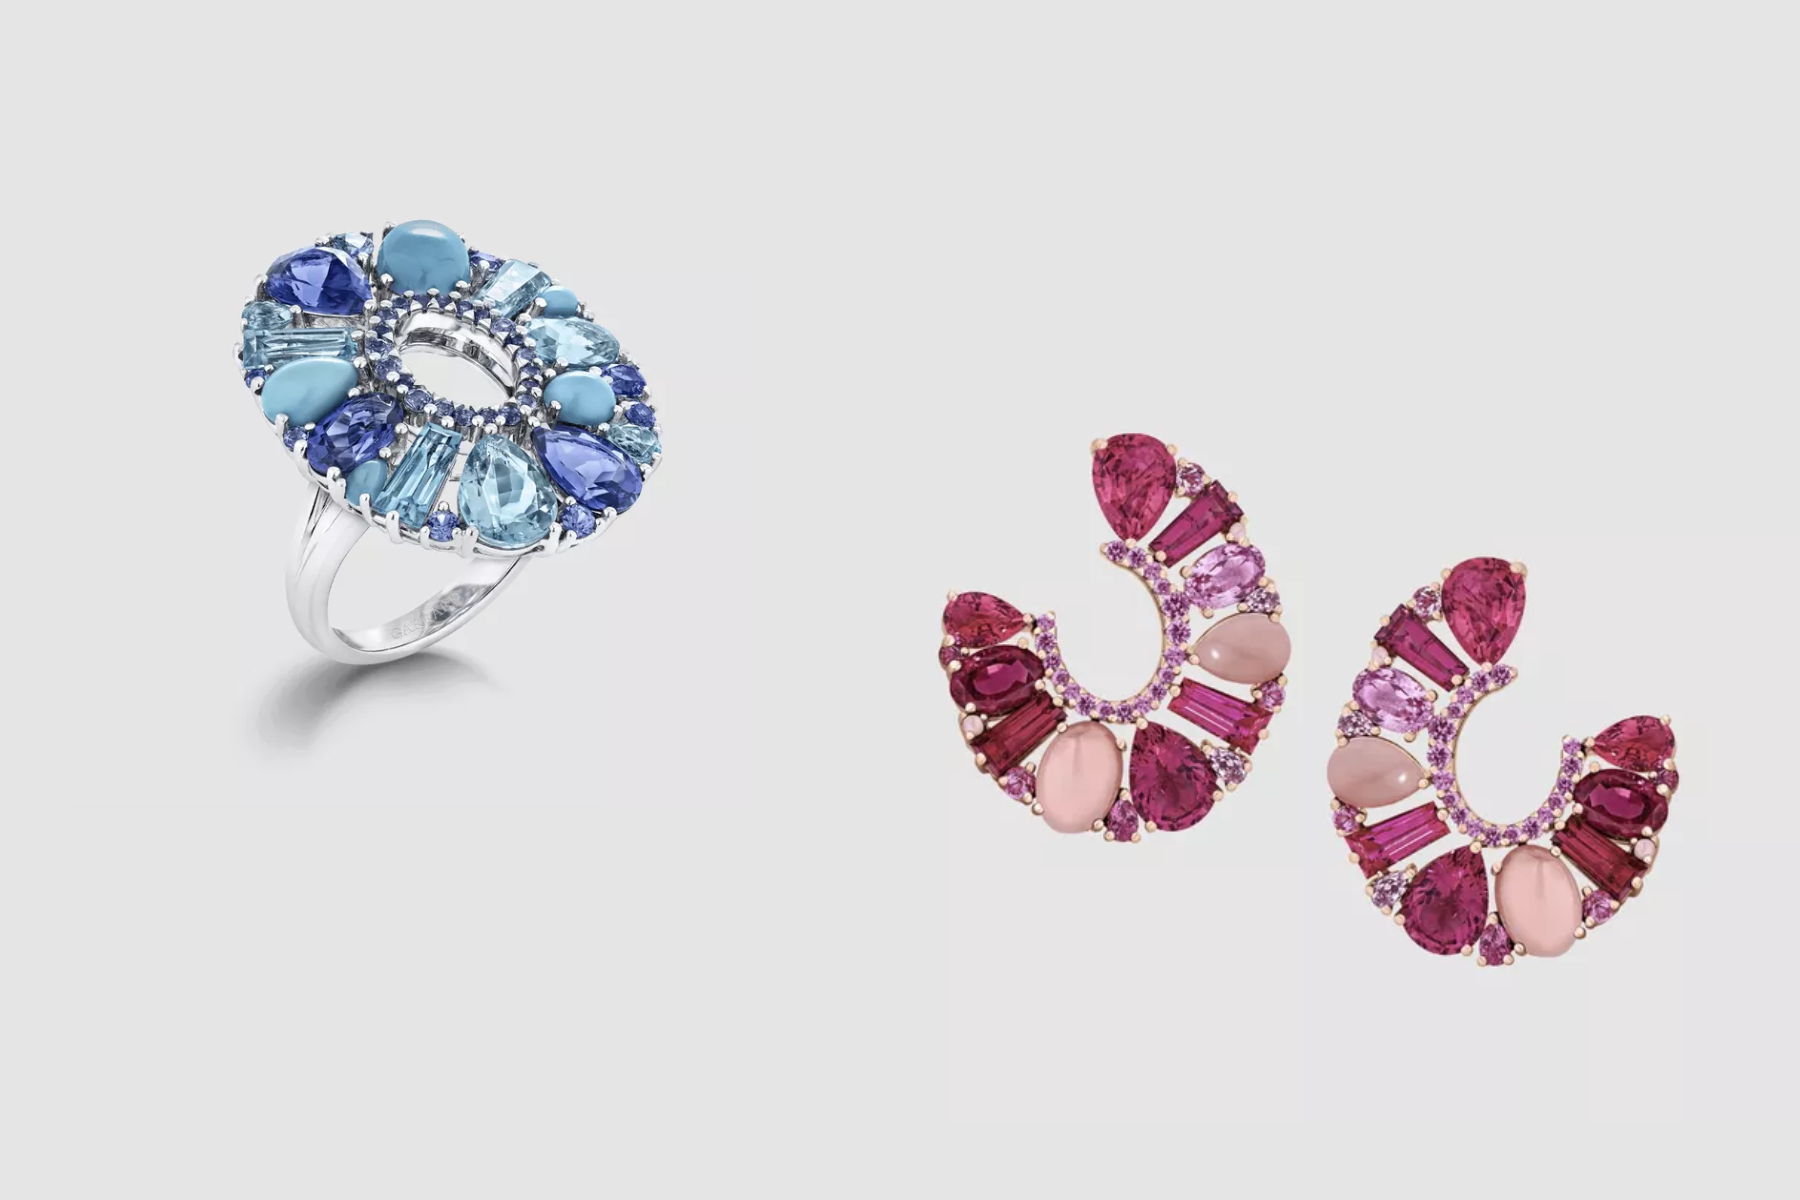 Two inspired jewelry from Garrard, a ring and earrings